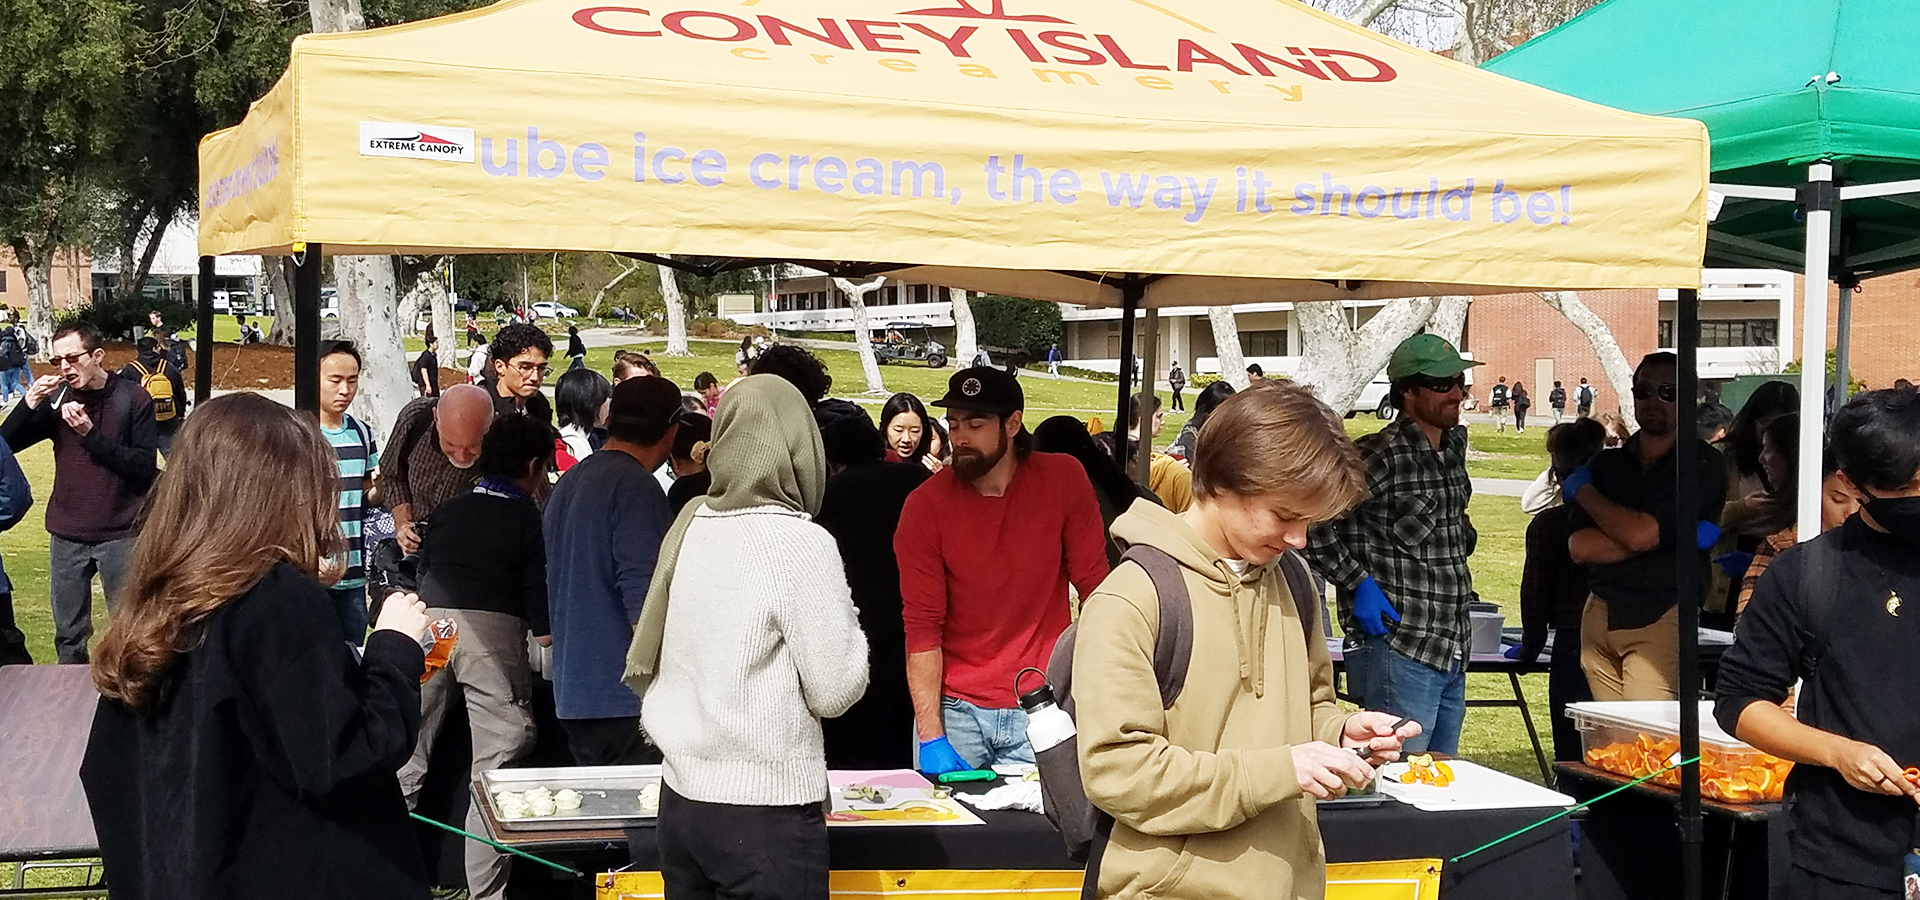 The Coney Island Creamery booth giving out free samples on the University Quad